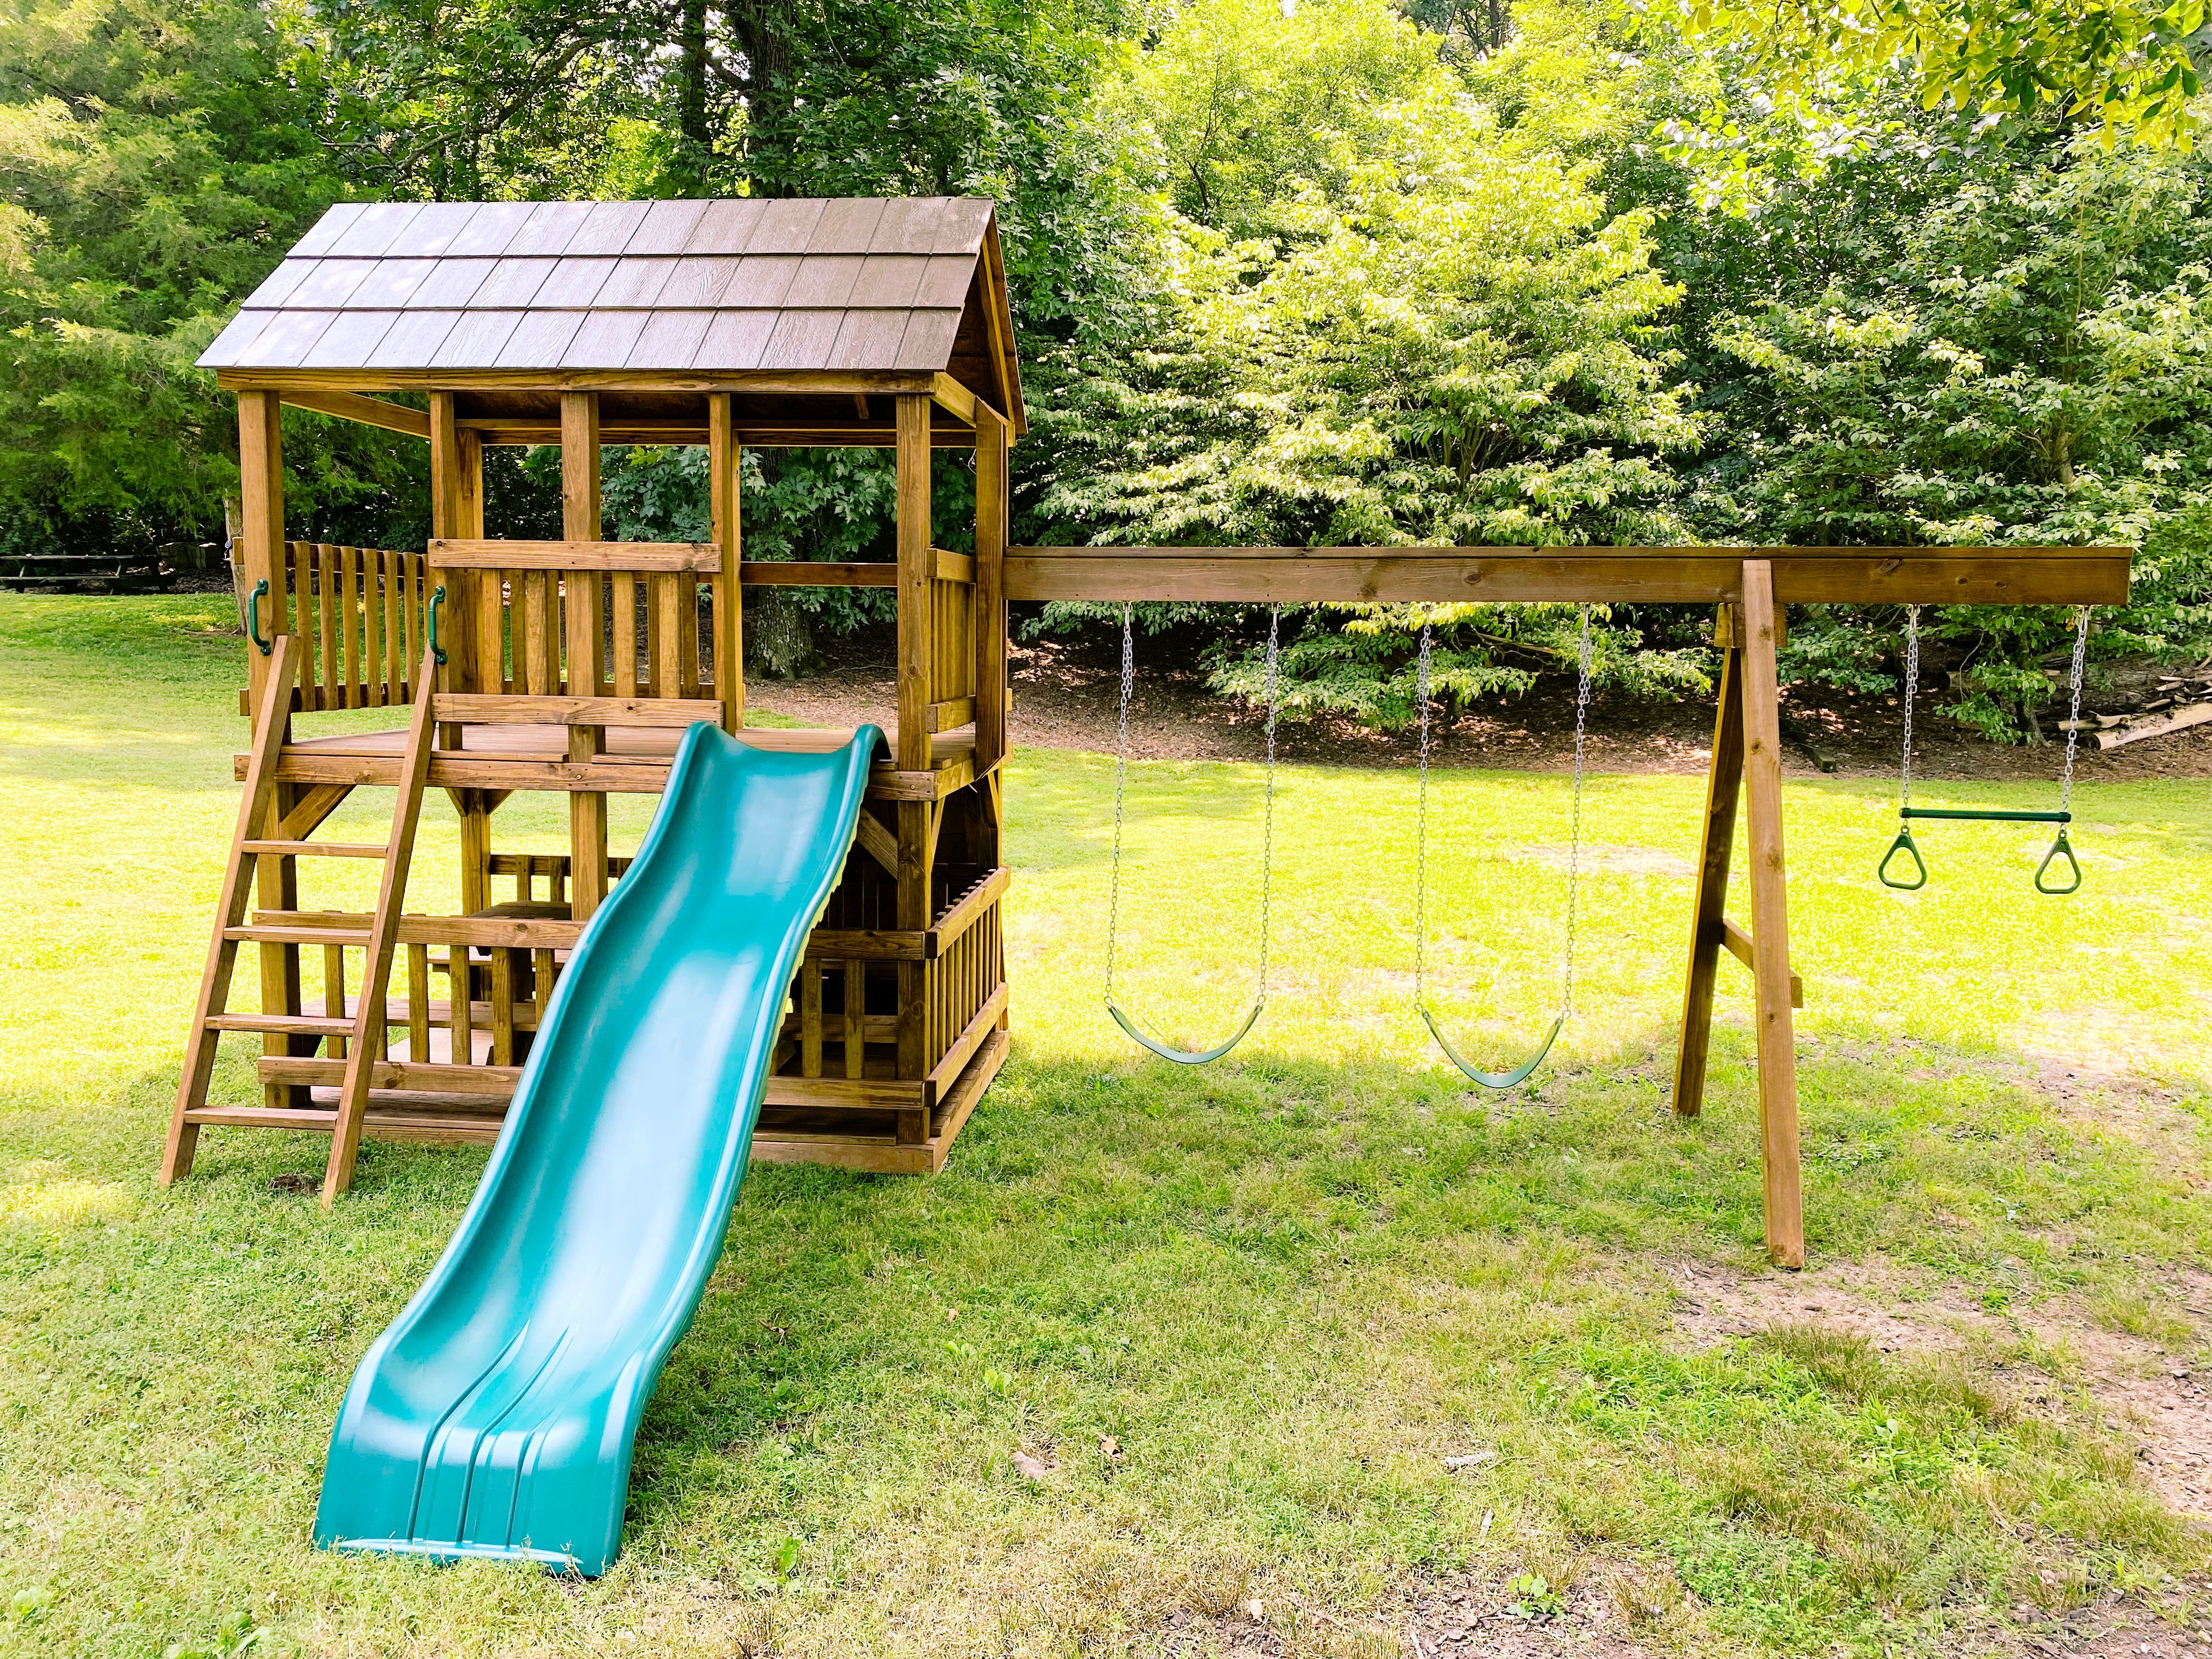 model 1700 playset. 5x7 fully covered tower, ladder, slide, picnic table, 3position attachment with 2 swings and a trapeze bar